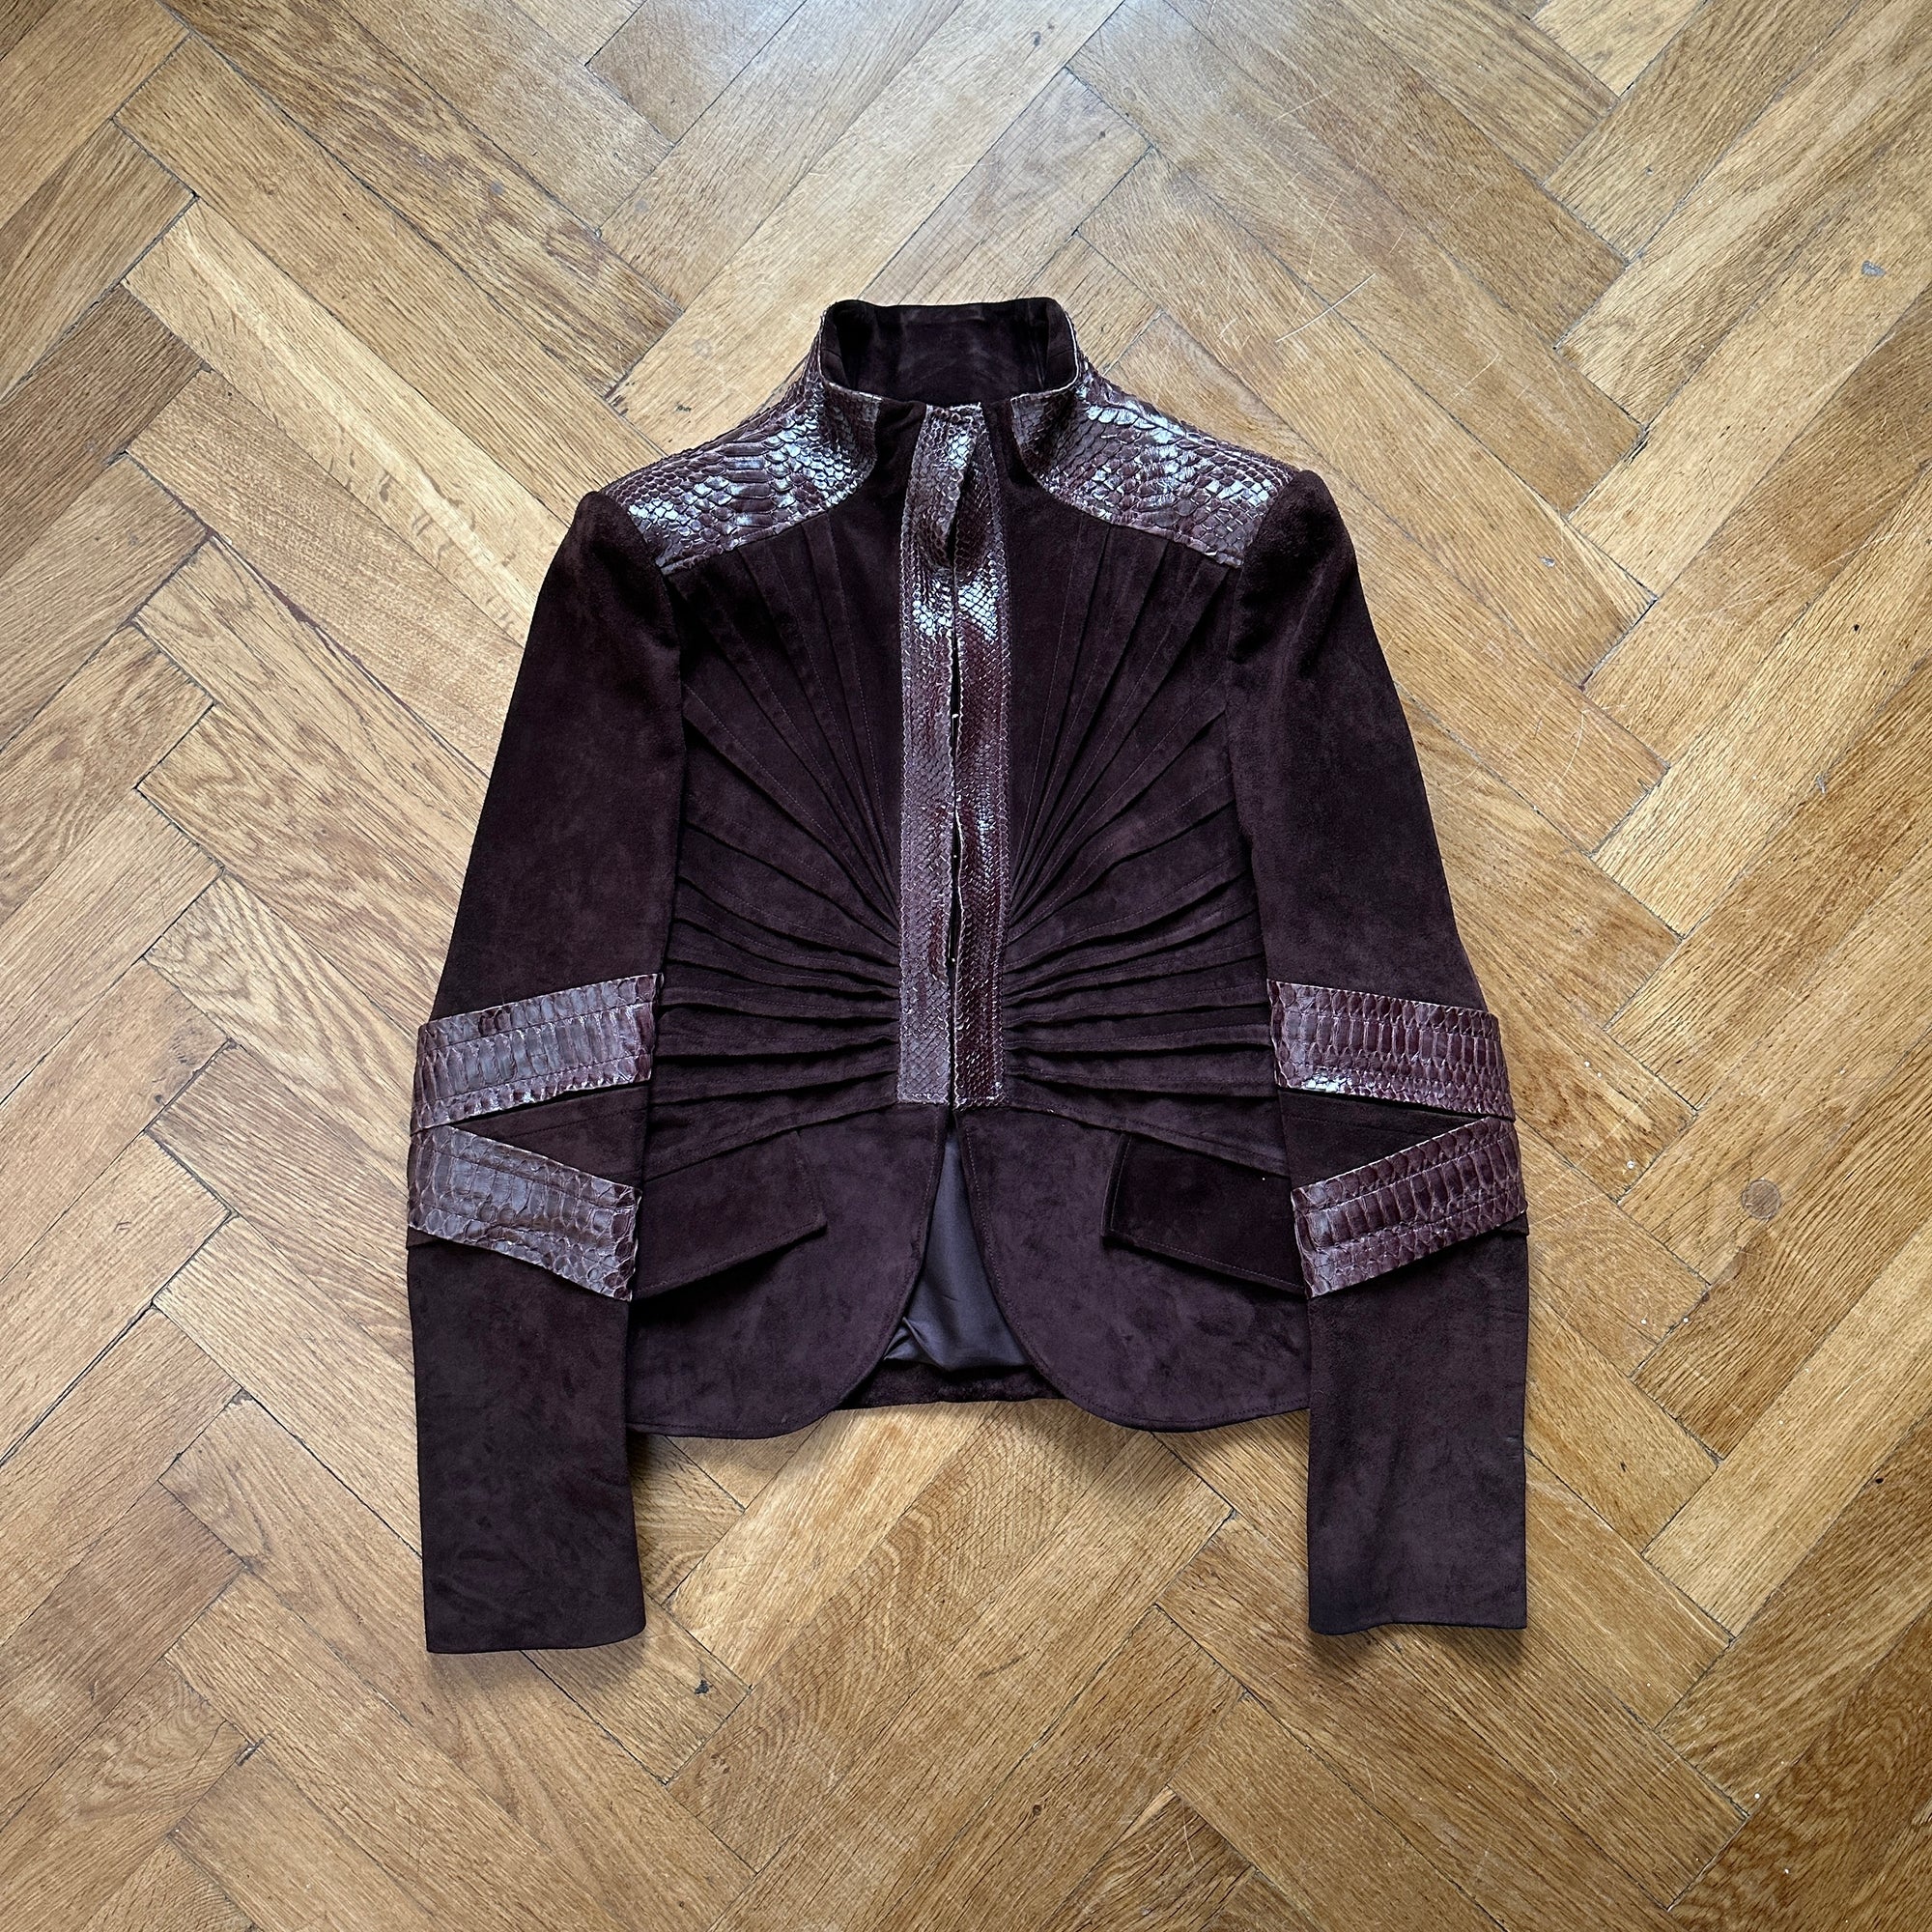 Gucci by Tom Ford SS04 Python Suede Paneled Jacket